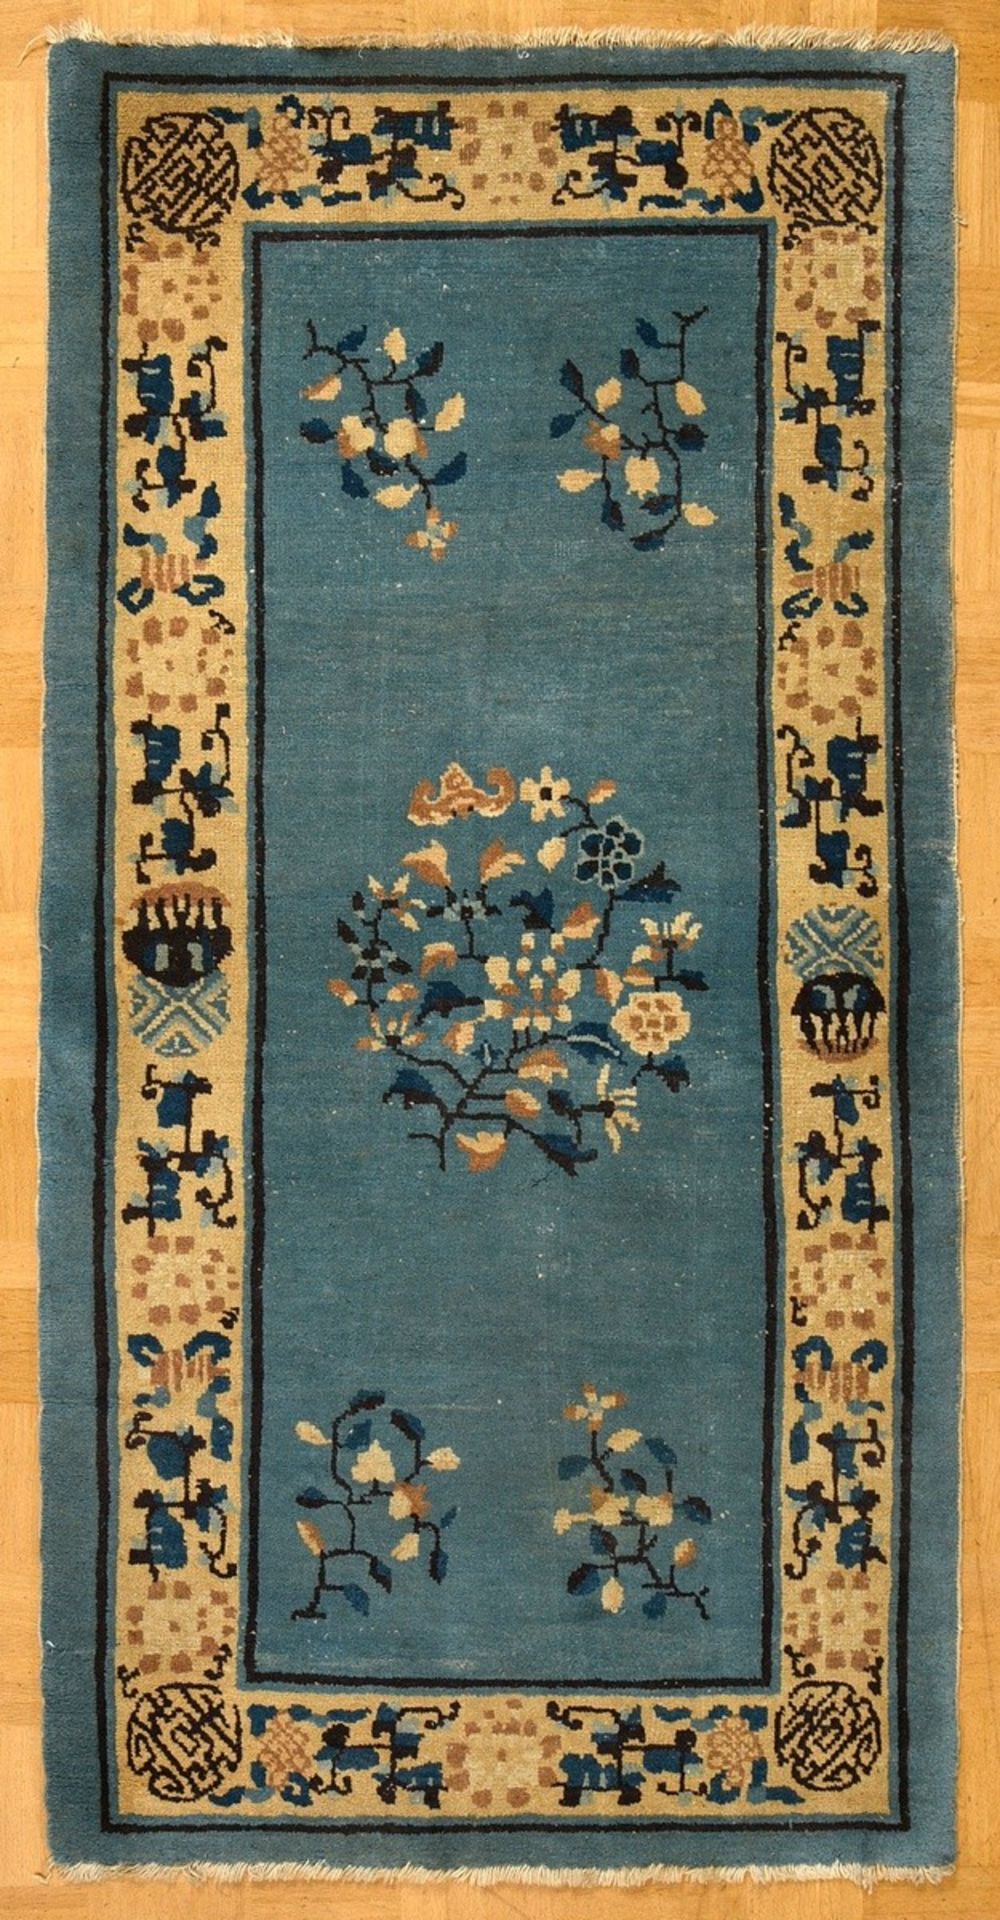 Chinese bridge "twigs and bat" on light blue field with light floral border and Shou characters in 